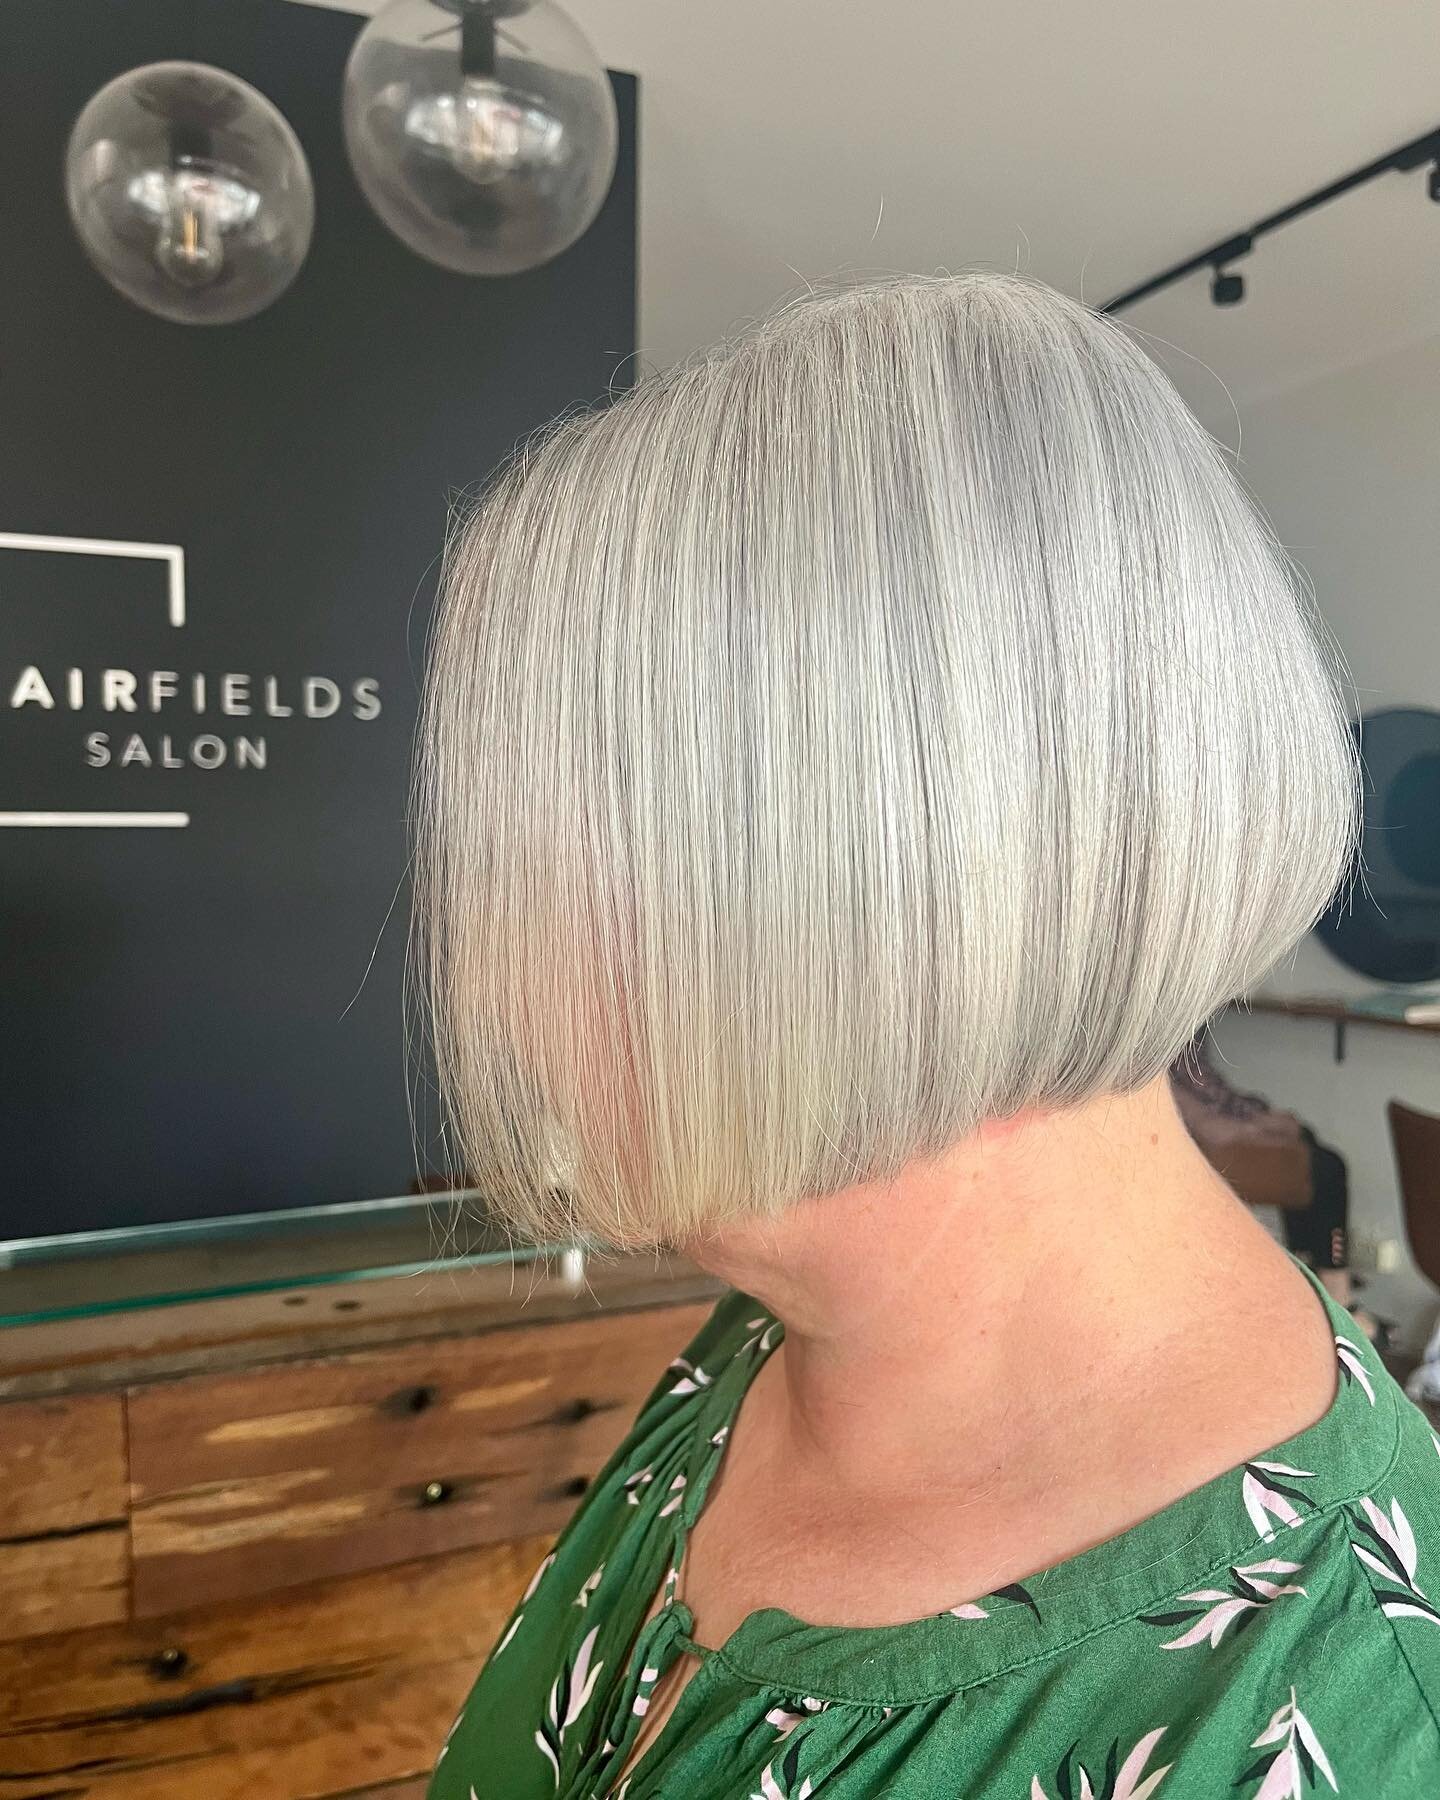 We do love a great BOB ❤️❤️ Thanks @denifowle  Cut by Victoria . We would love to take credit for this colour but it's natural !! #hairfieldssalon #kirraweesalon #bobhaircut